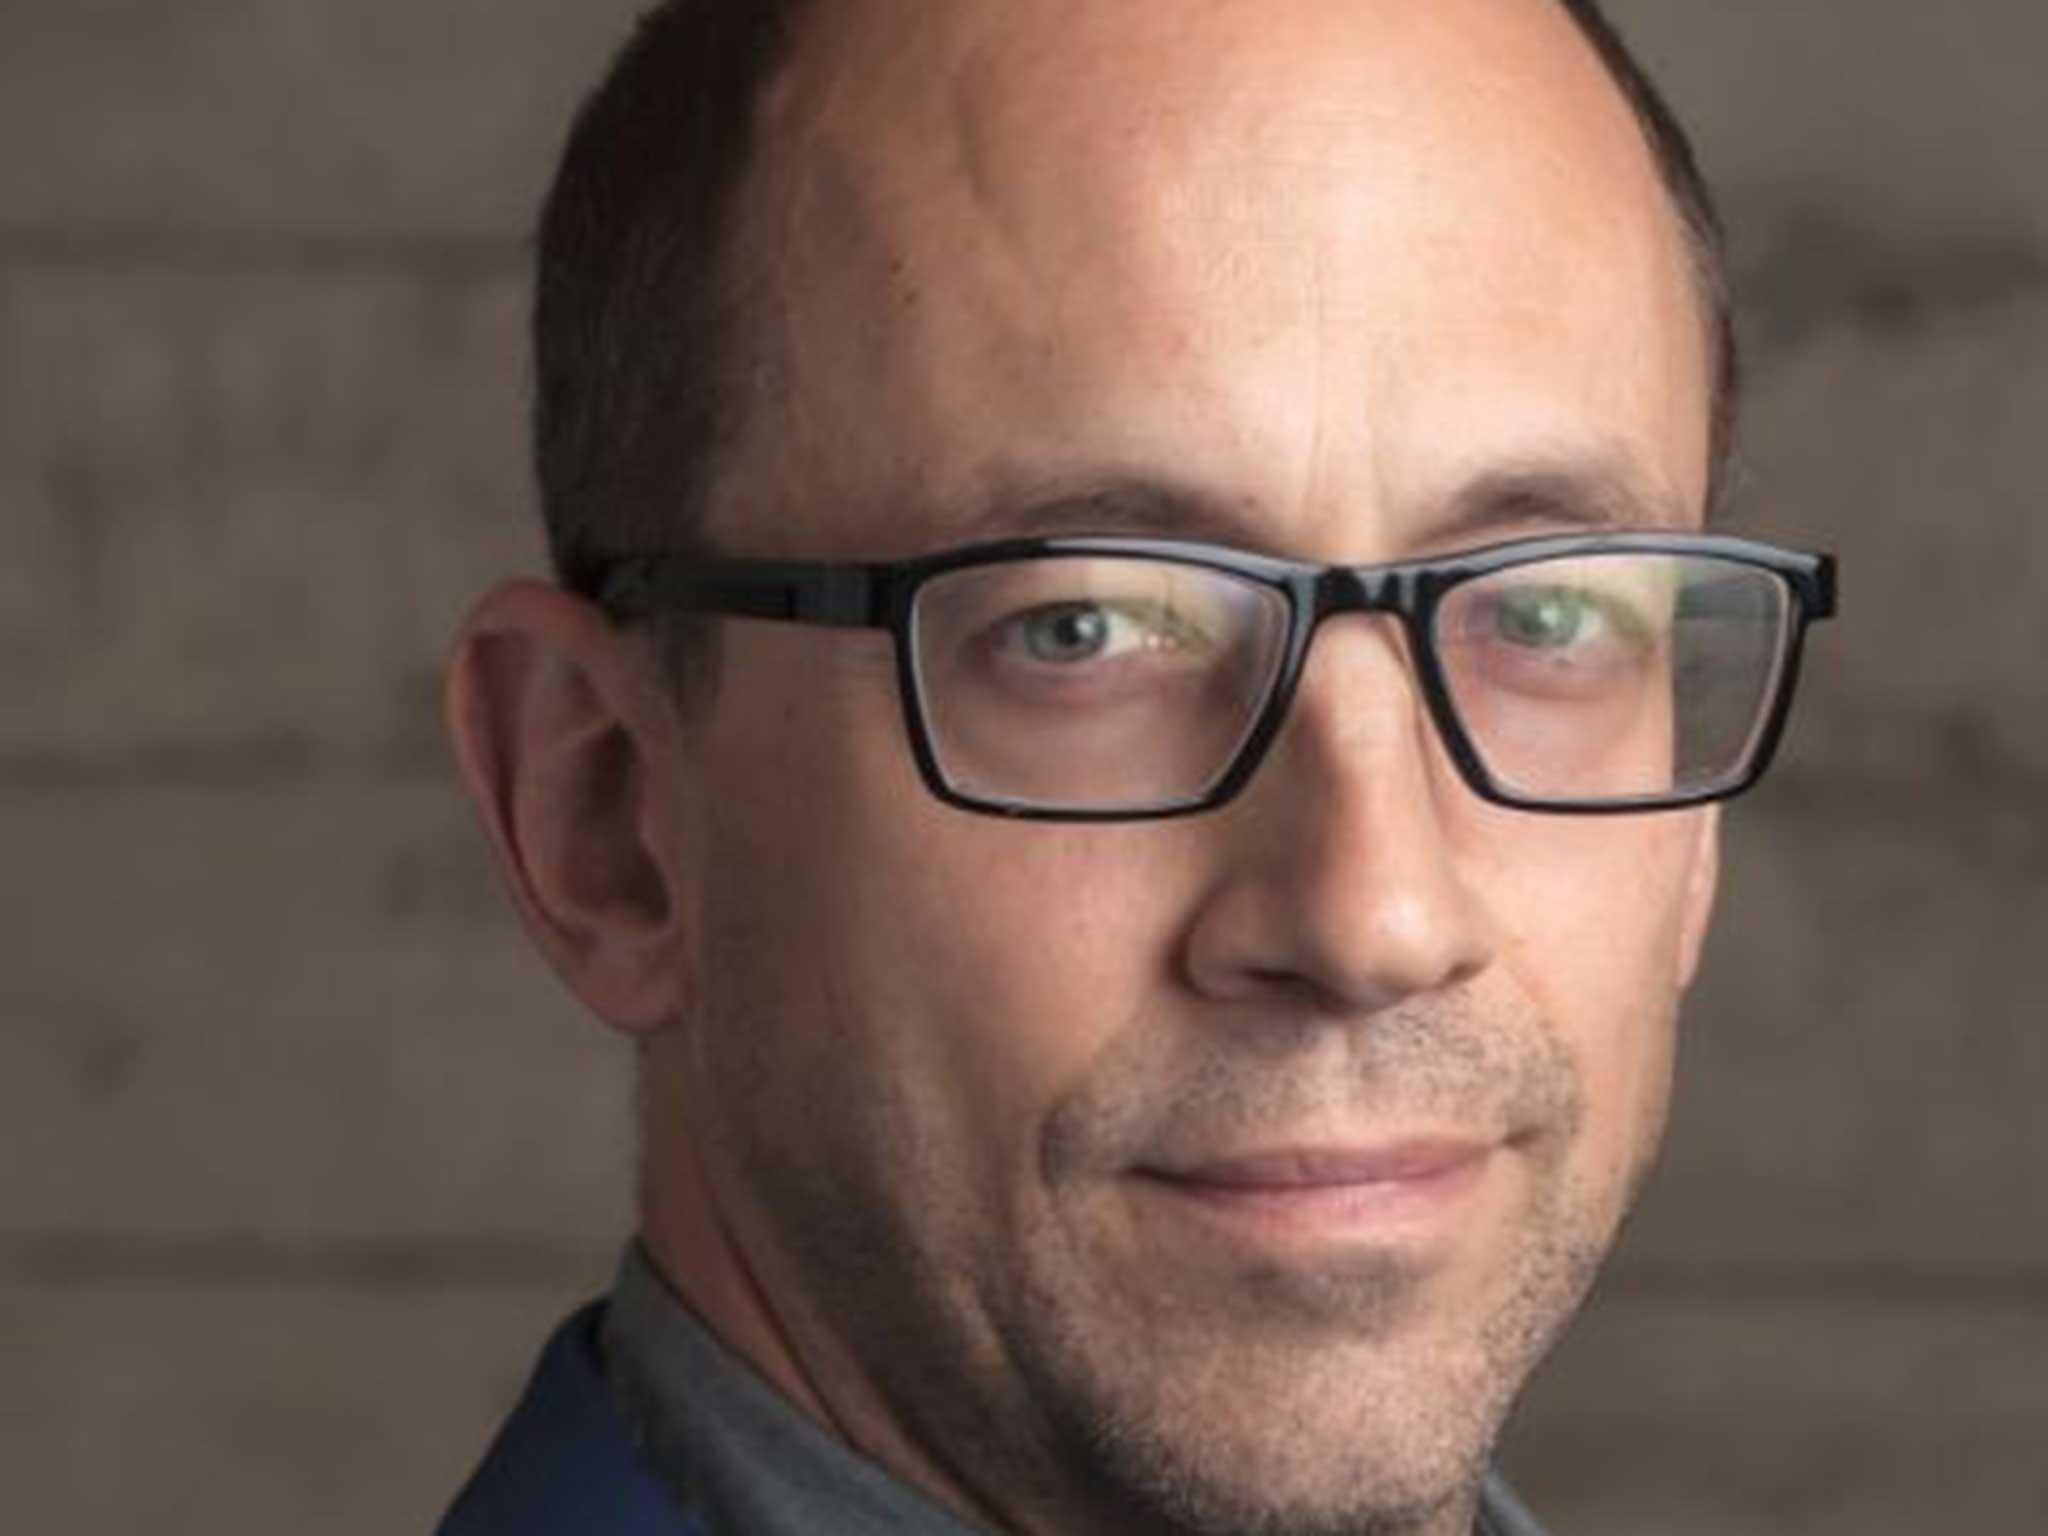 Twitter's chief executive Dick Costolo